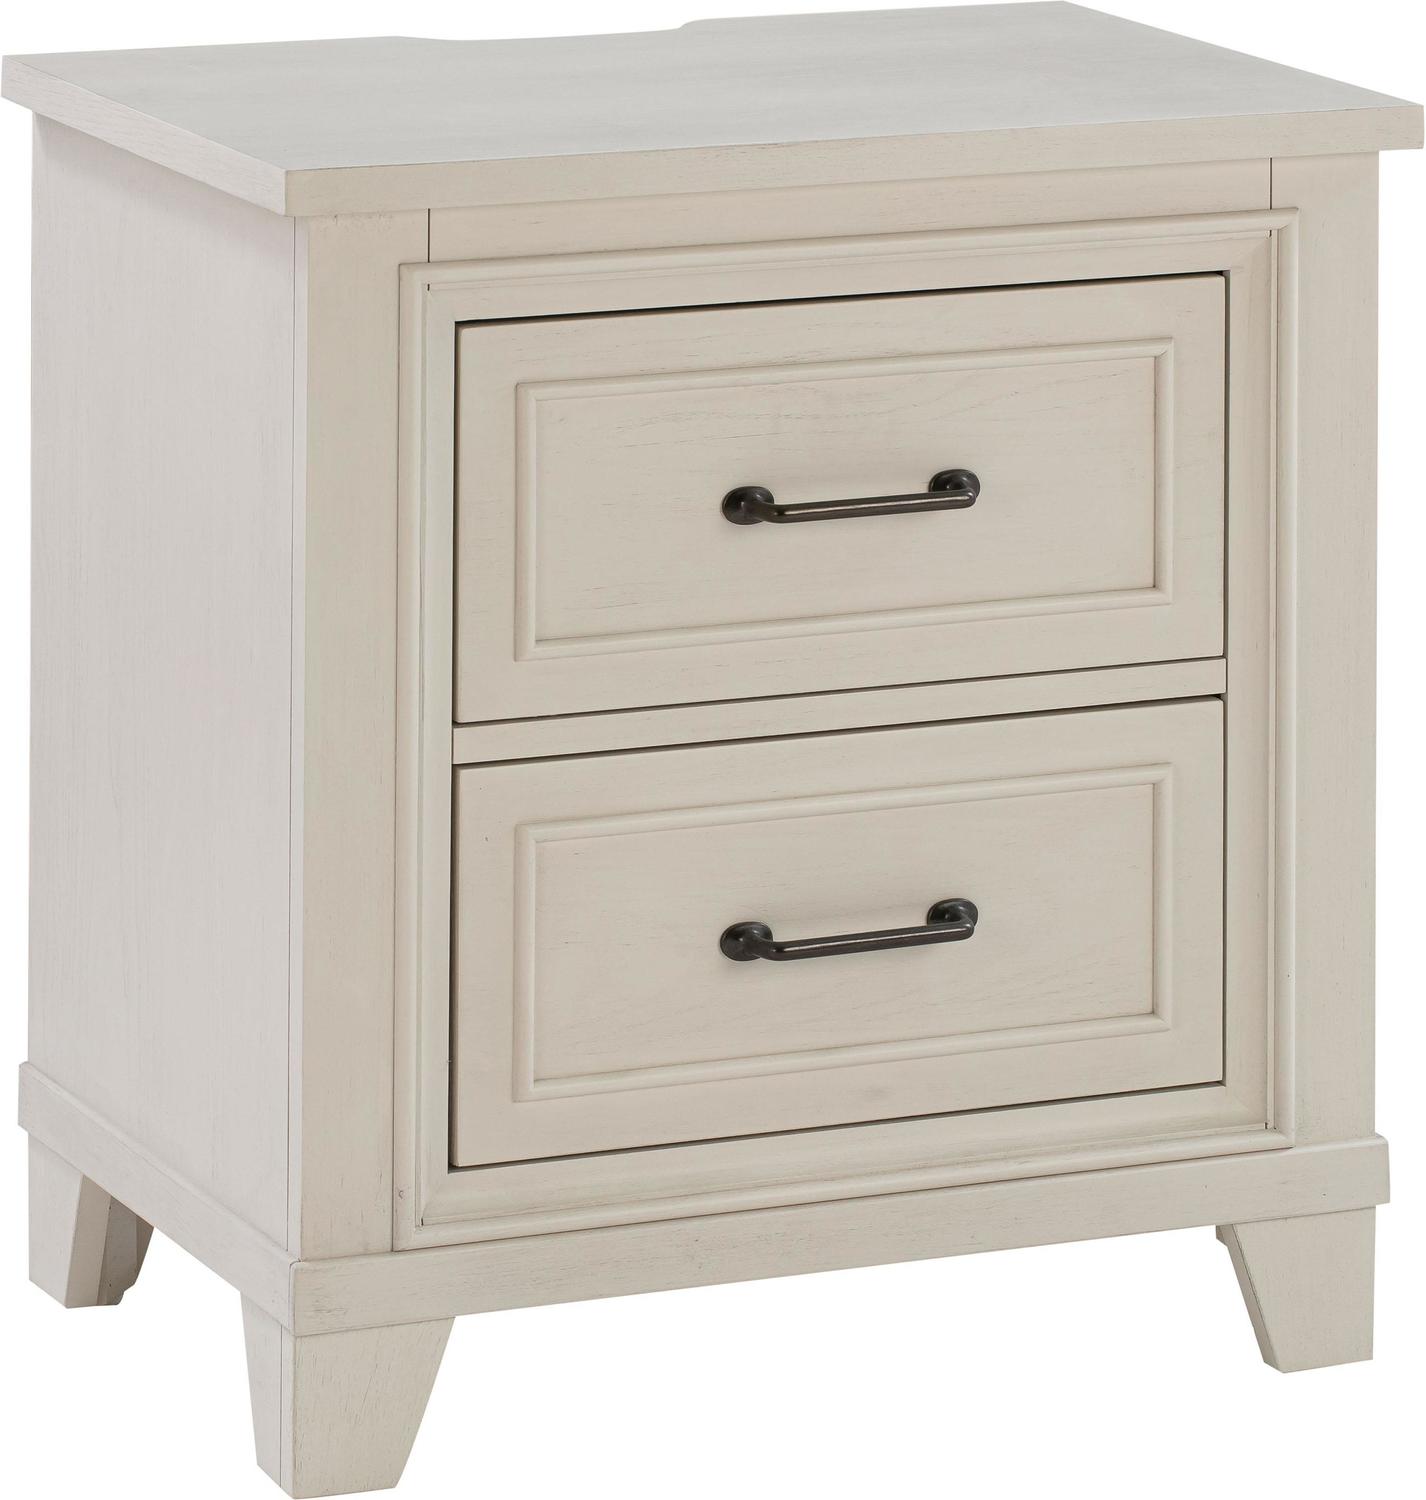 cheap nightstands set of 2 Contemporary Design Furniture Nightstands White